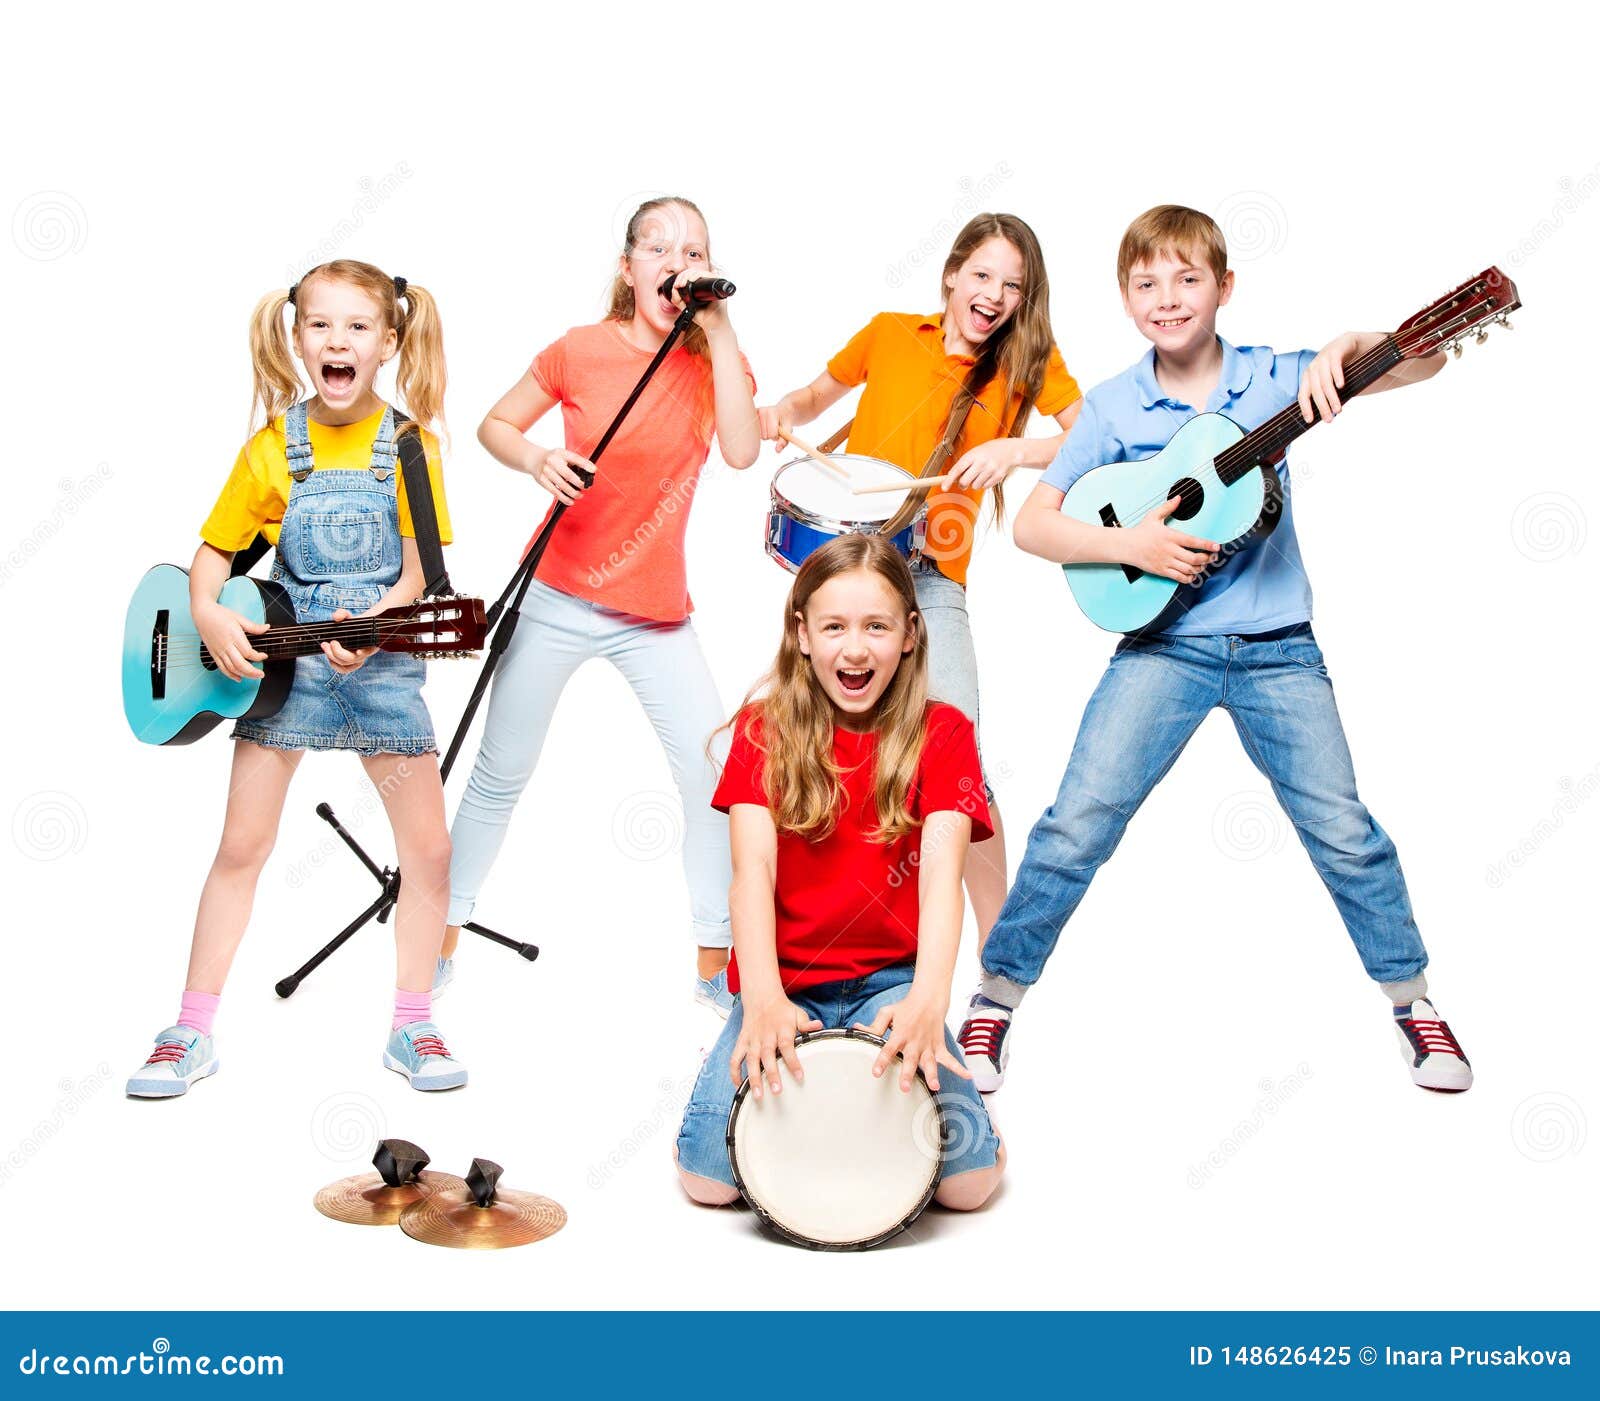 7,667 Group Musical Instruments Stock Photos - Free & Royalty-Free ...